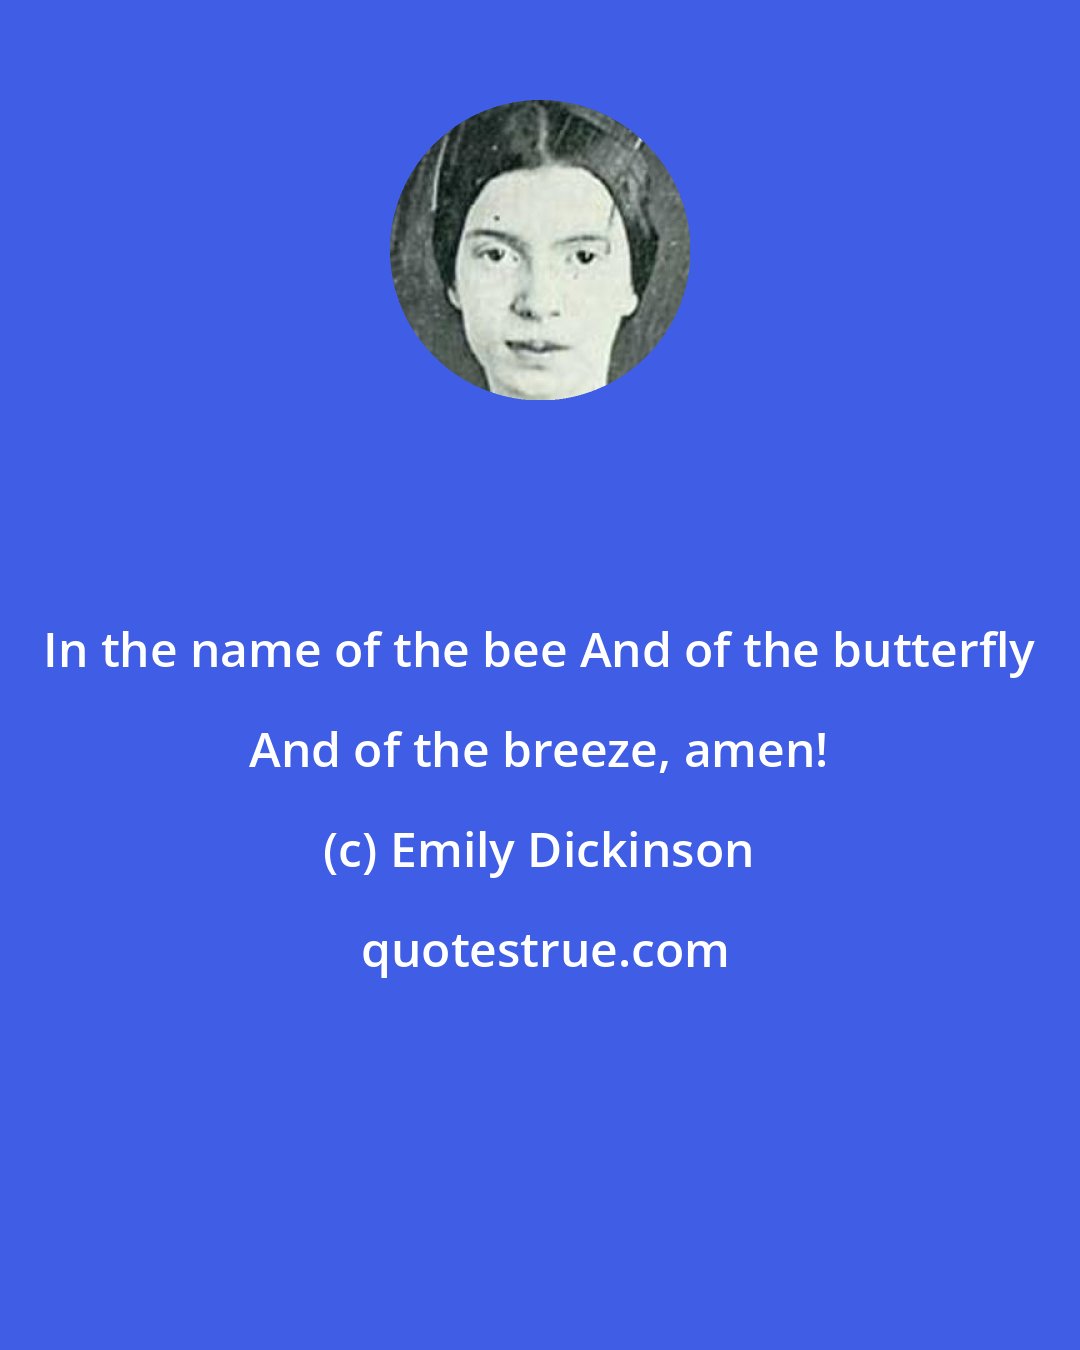 Emily Dickinson: In the name of the bee And of the butterfly And of the breeze, amen!